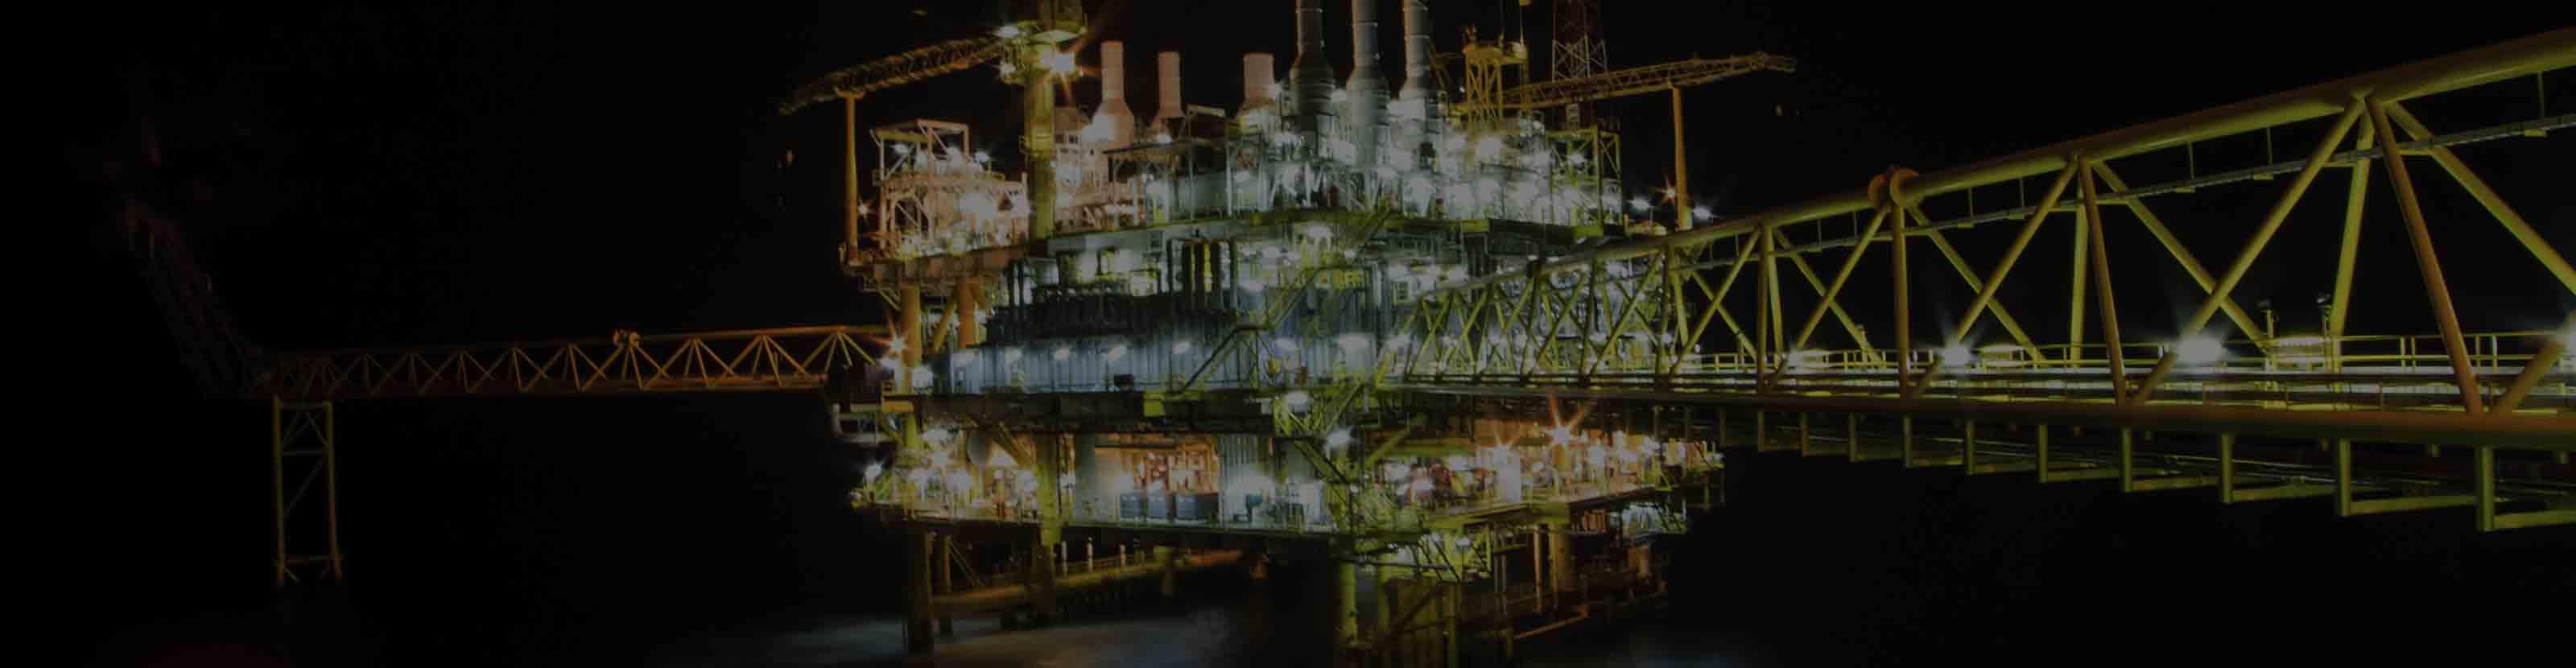 A brightly lit offshore drilling and production platform at night